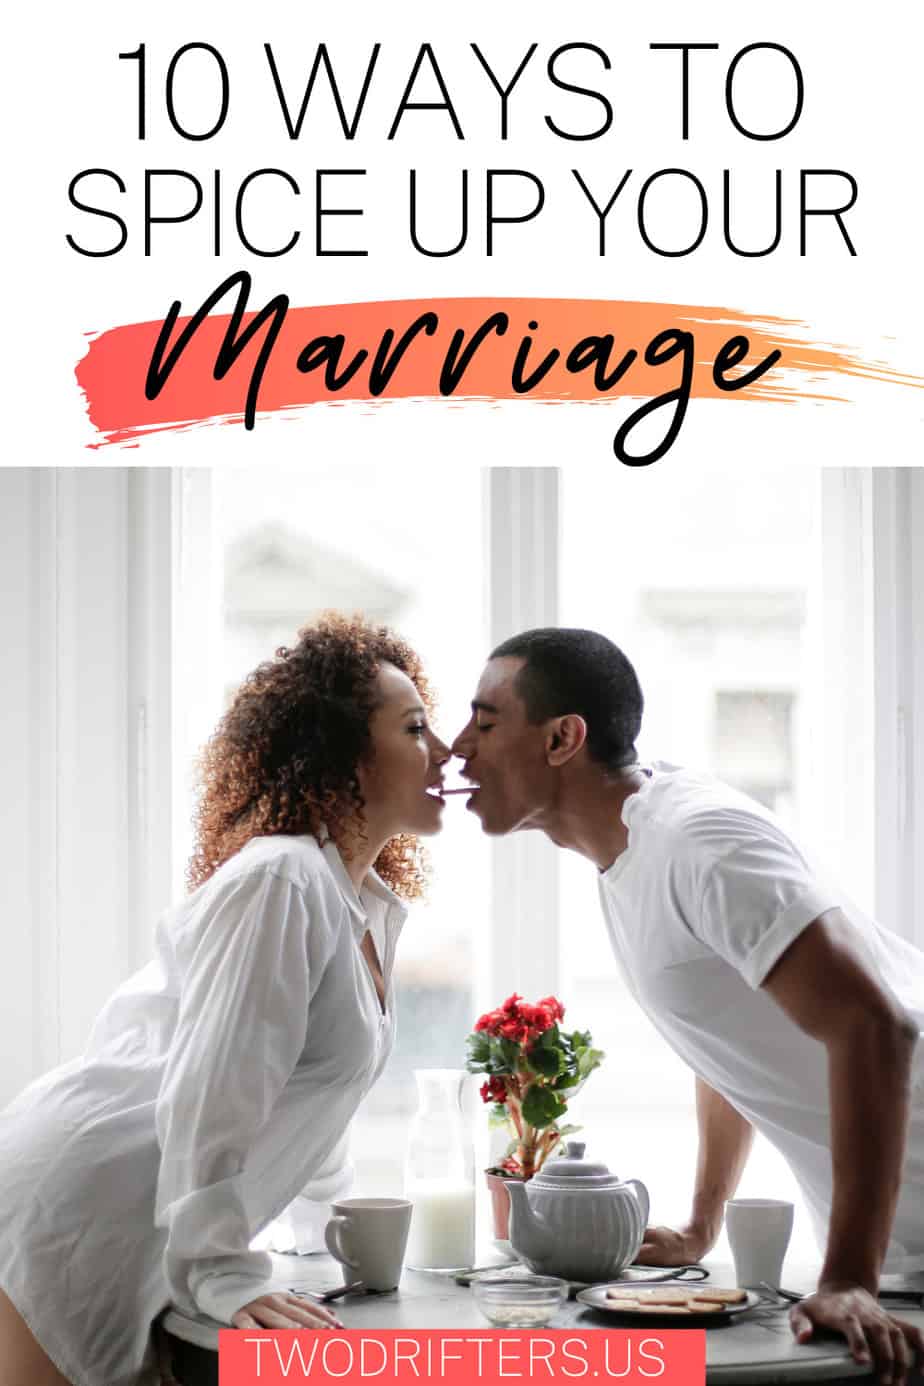 Pinterest social image that says “10 ways to spice up your marriage.”